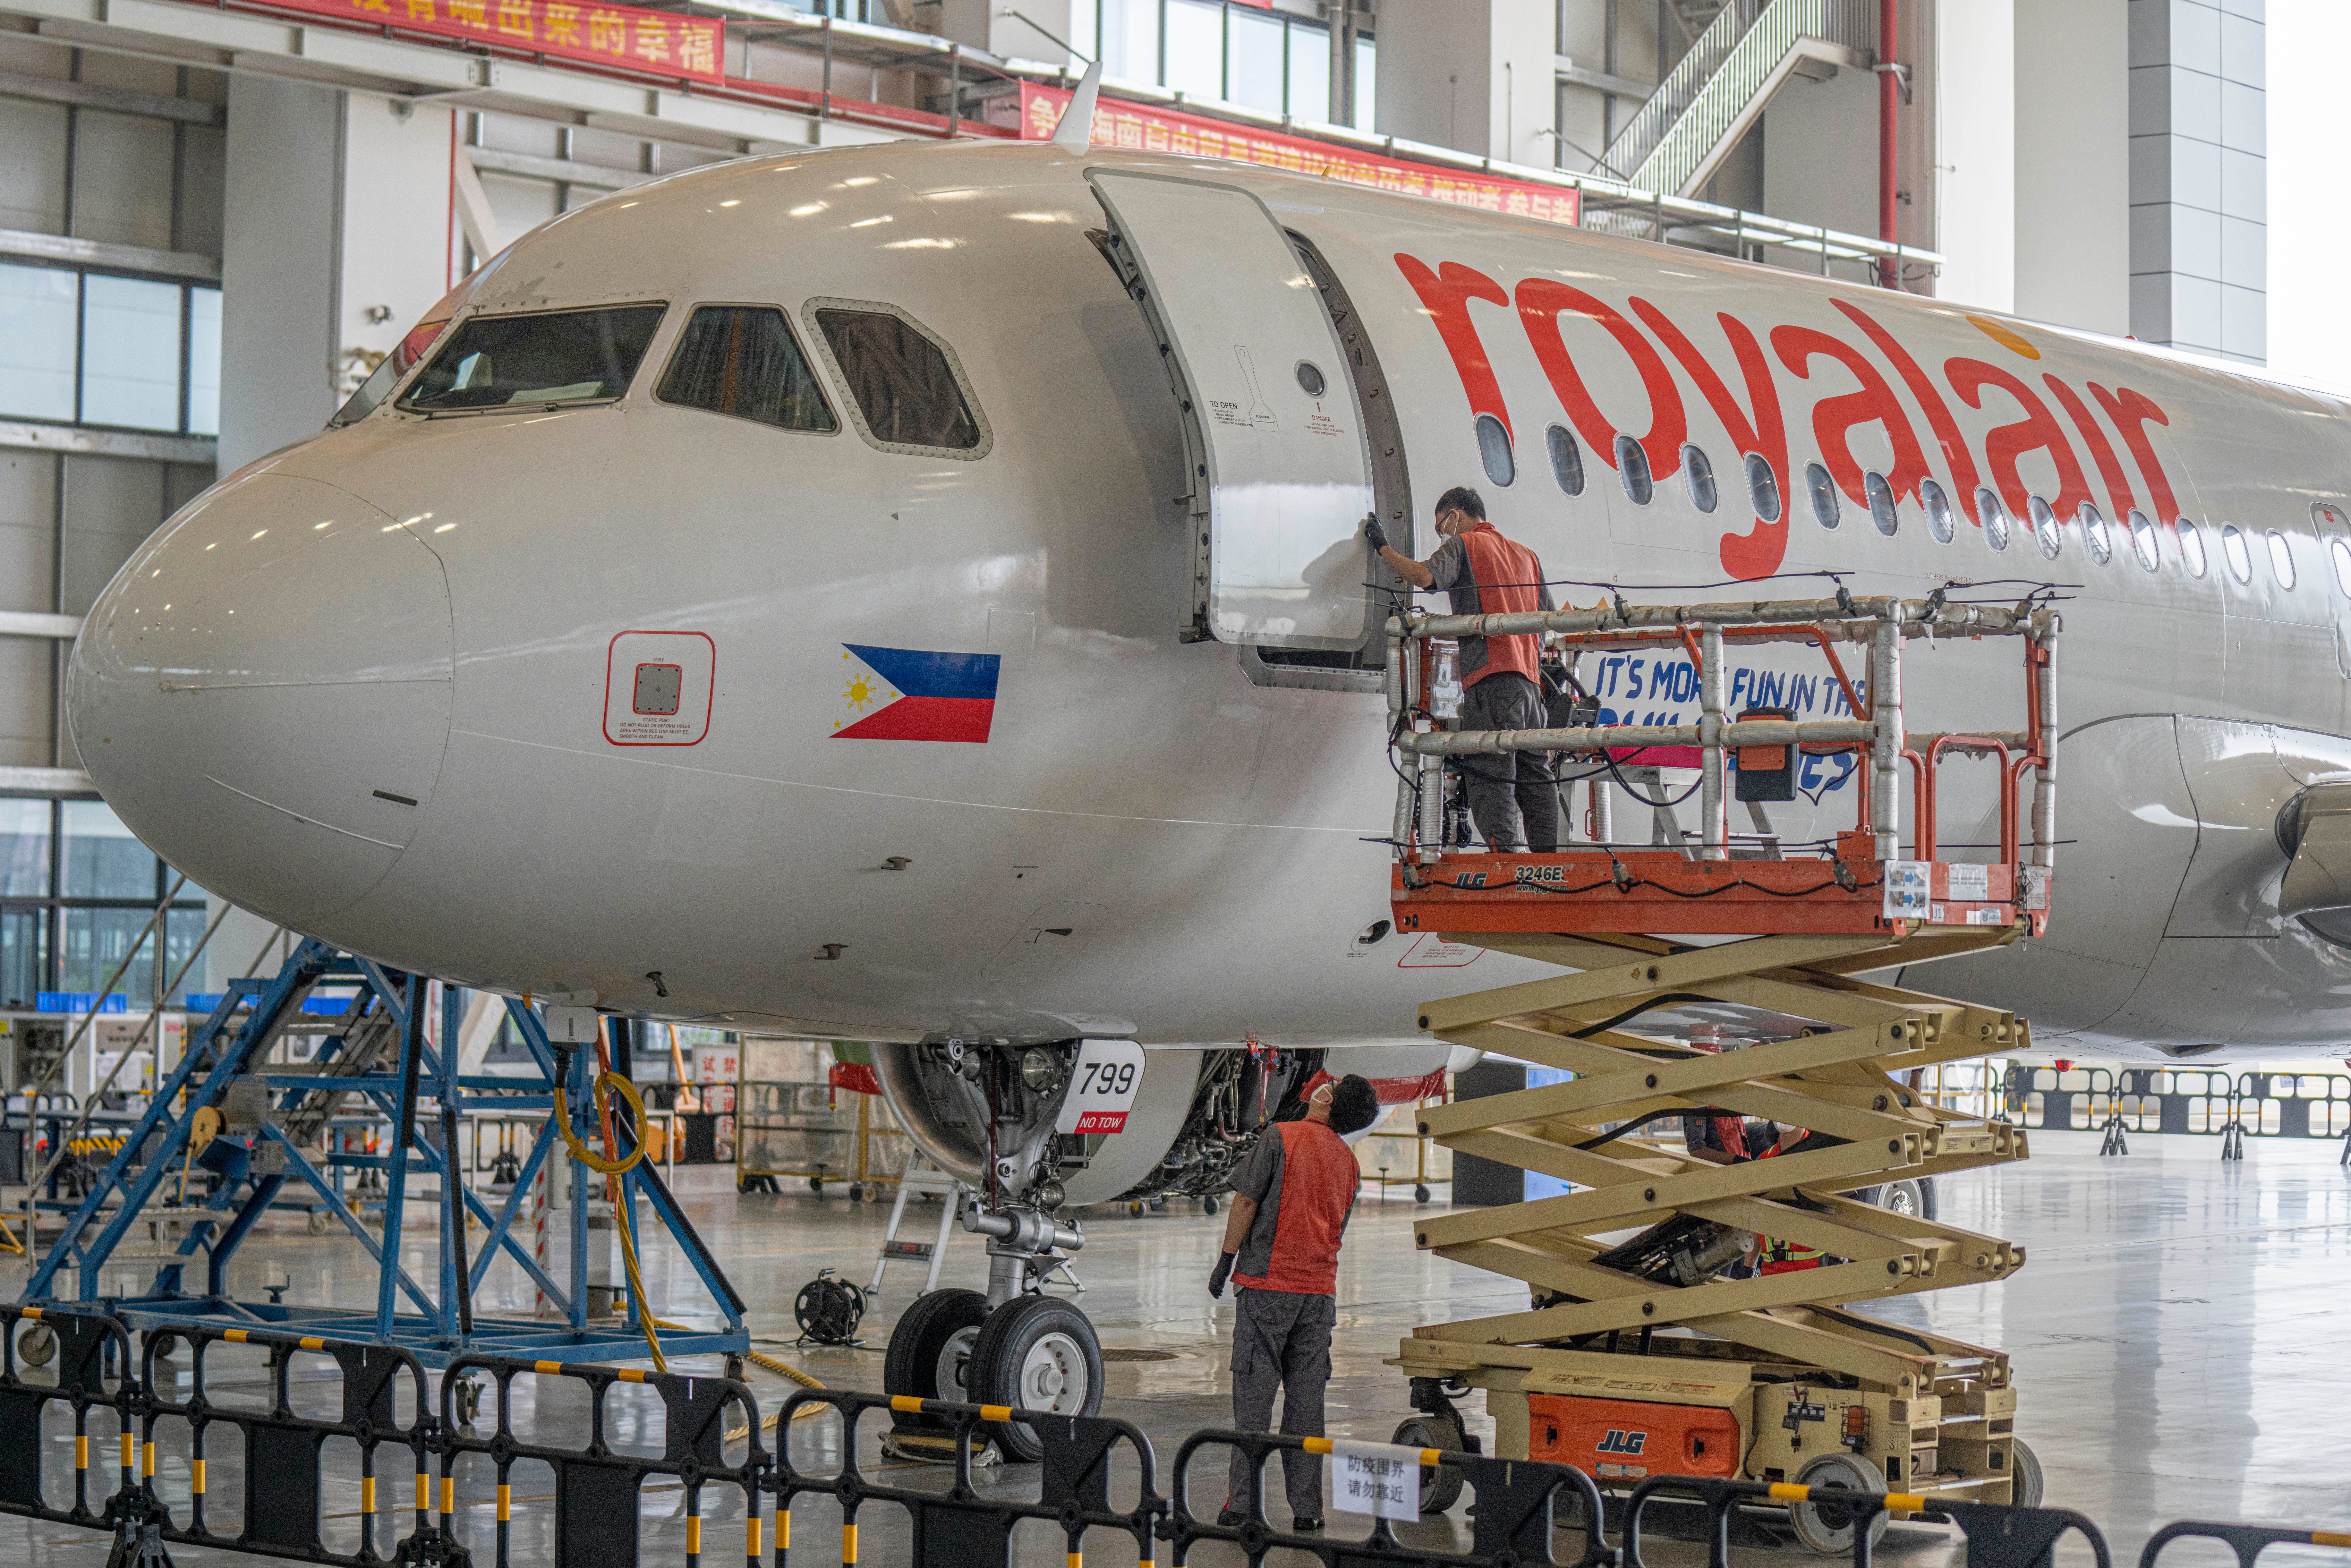 Engineers carry out maintenance work on an Airbus A320